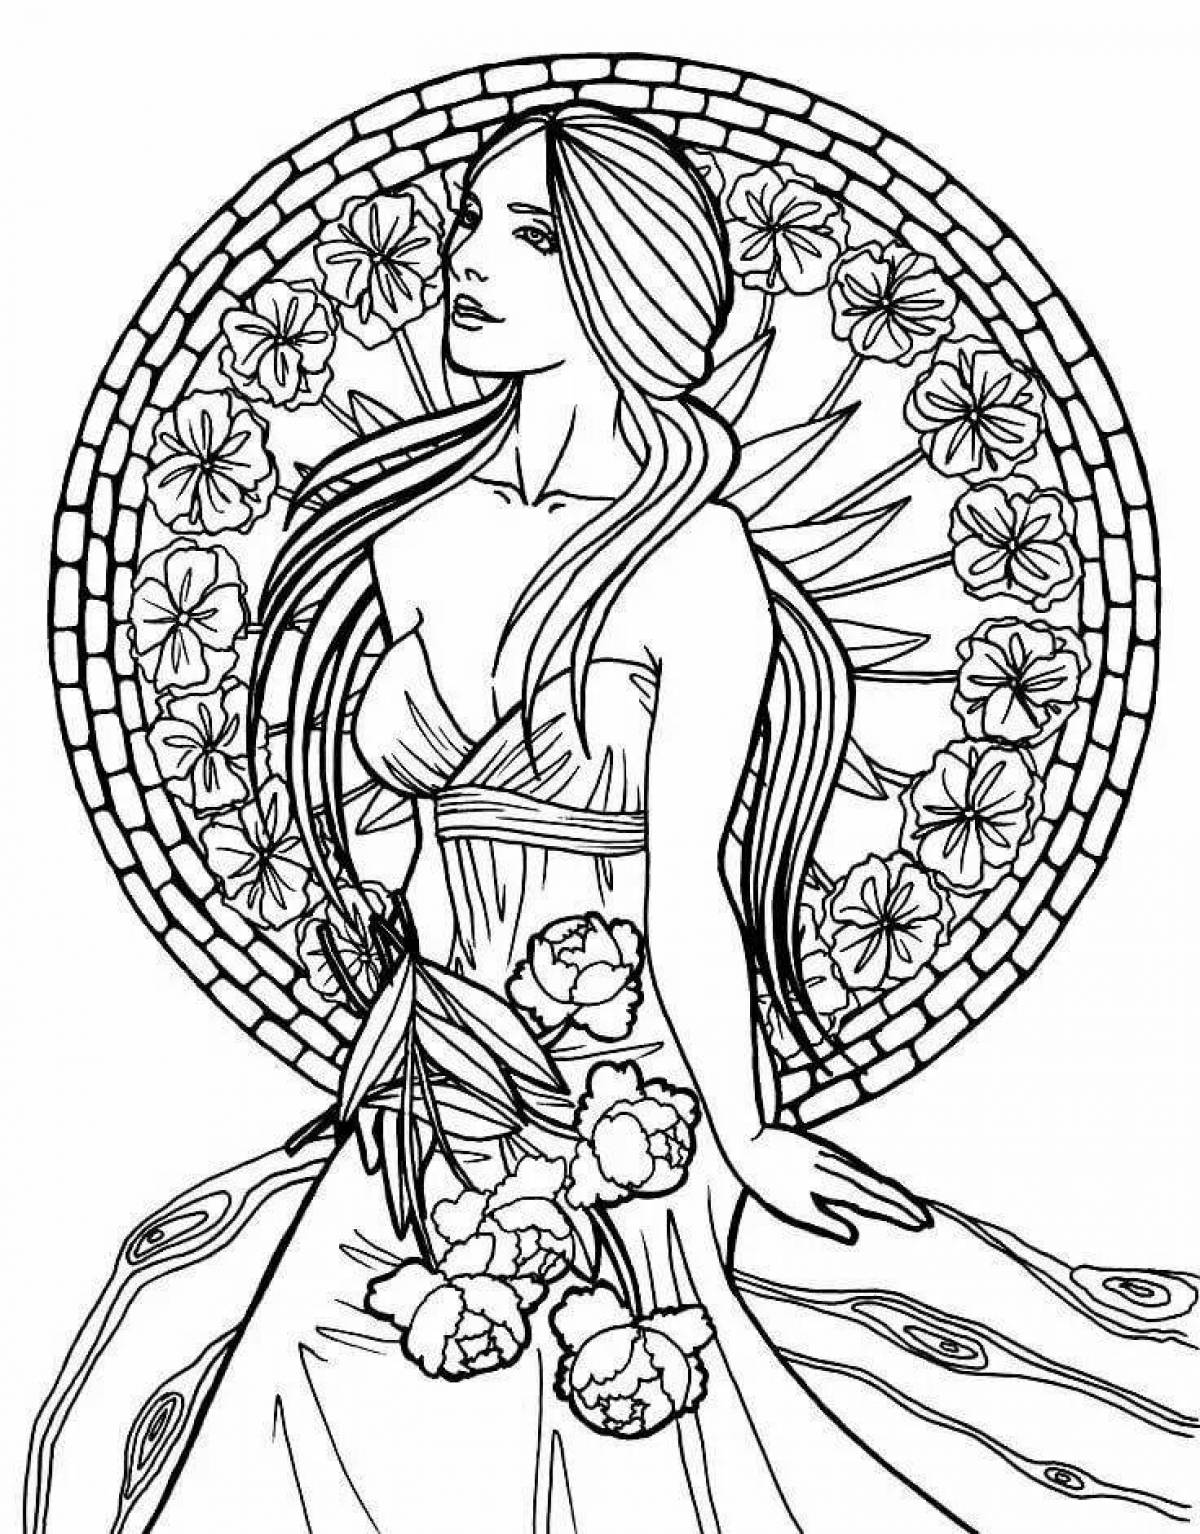 Animated adult girls coloring page